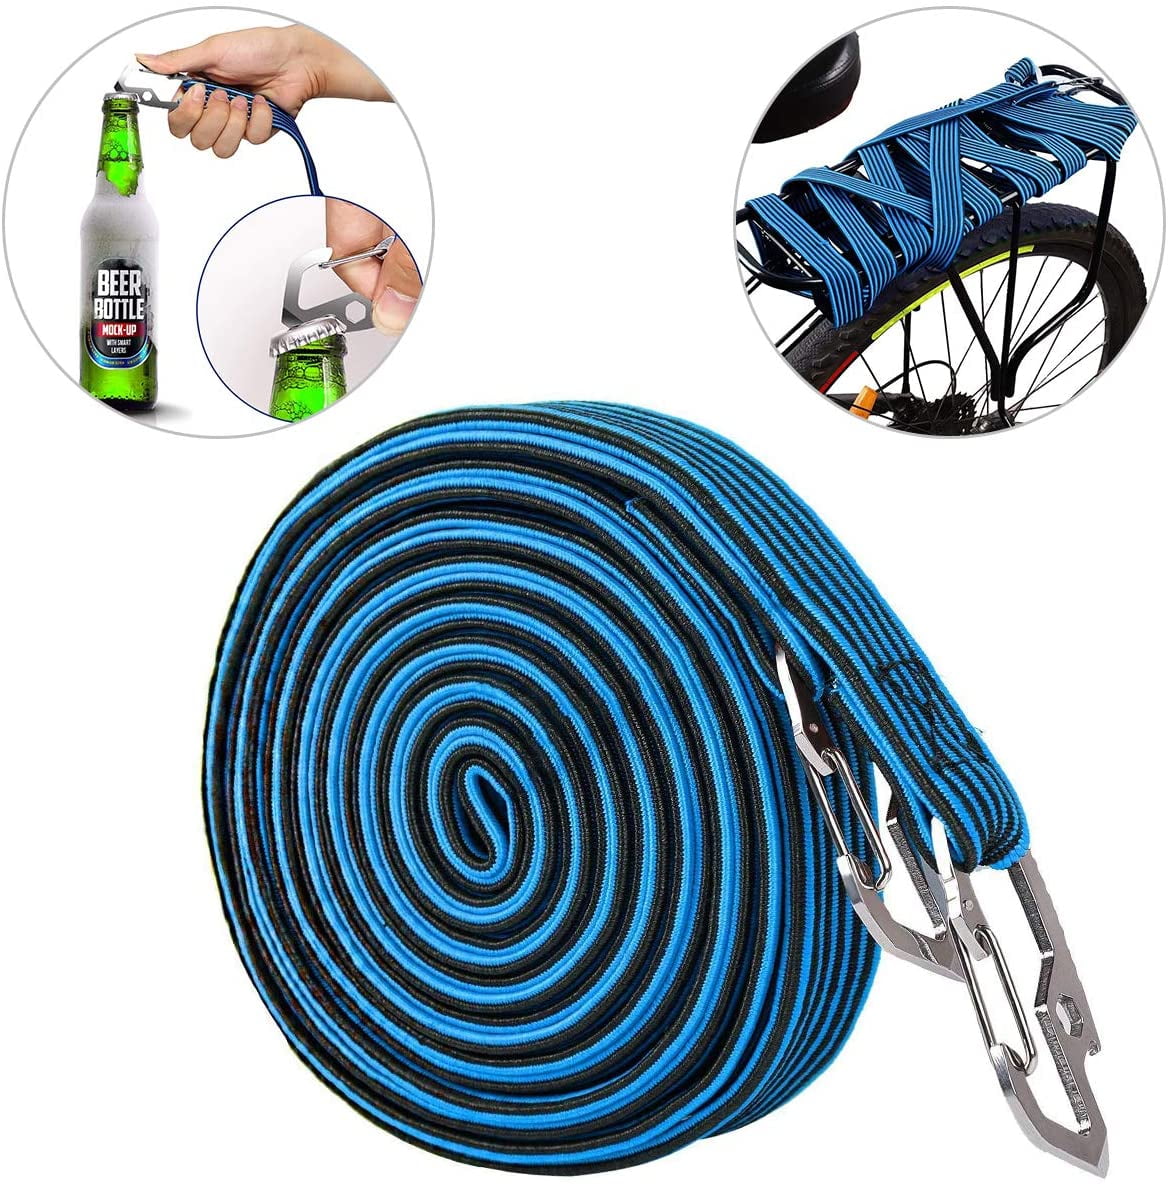 Suitable for Bicycles Electric Cars,2 & 4 Meter ASEOK Elasticated Luggage Rope 2M, Blue Elasticated Bungee Cord,Universal Heavy Duty Elastic Bicycle Rack Strap Bungee Cord with Carbon Steel Hook